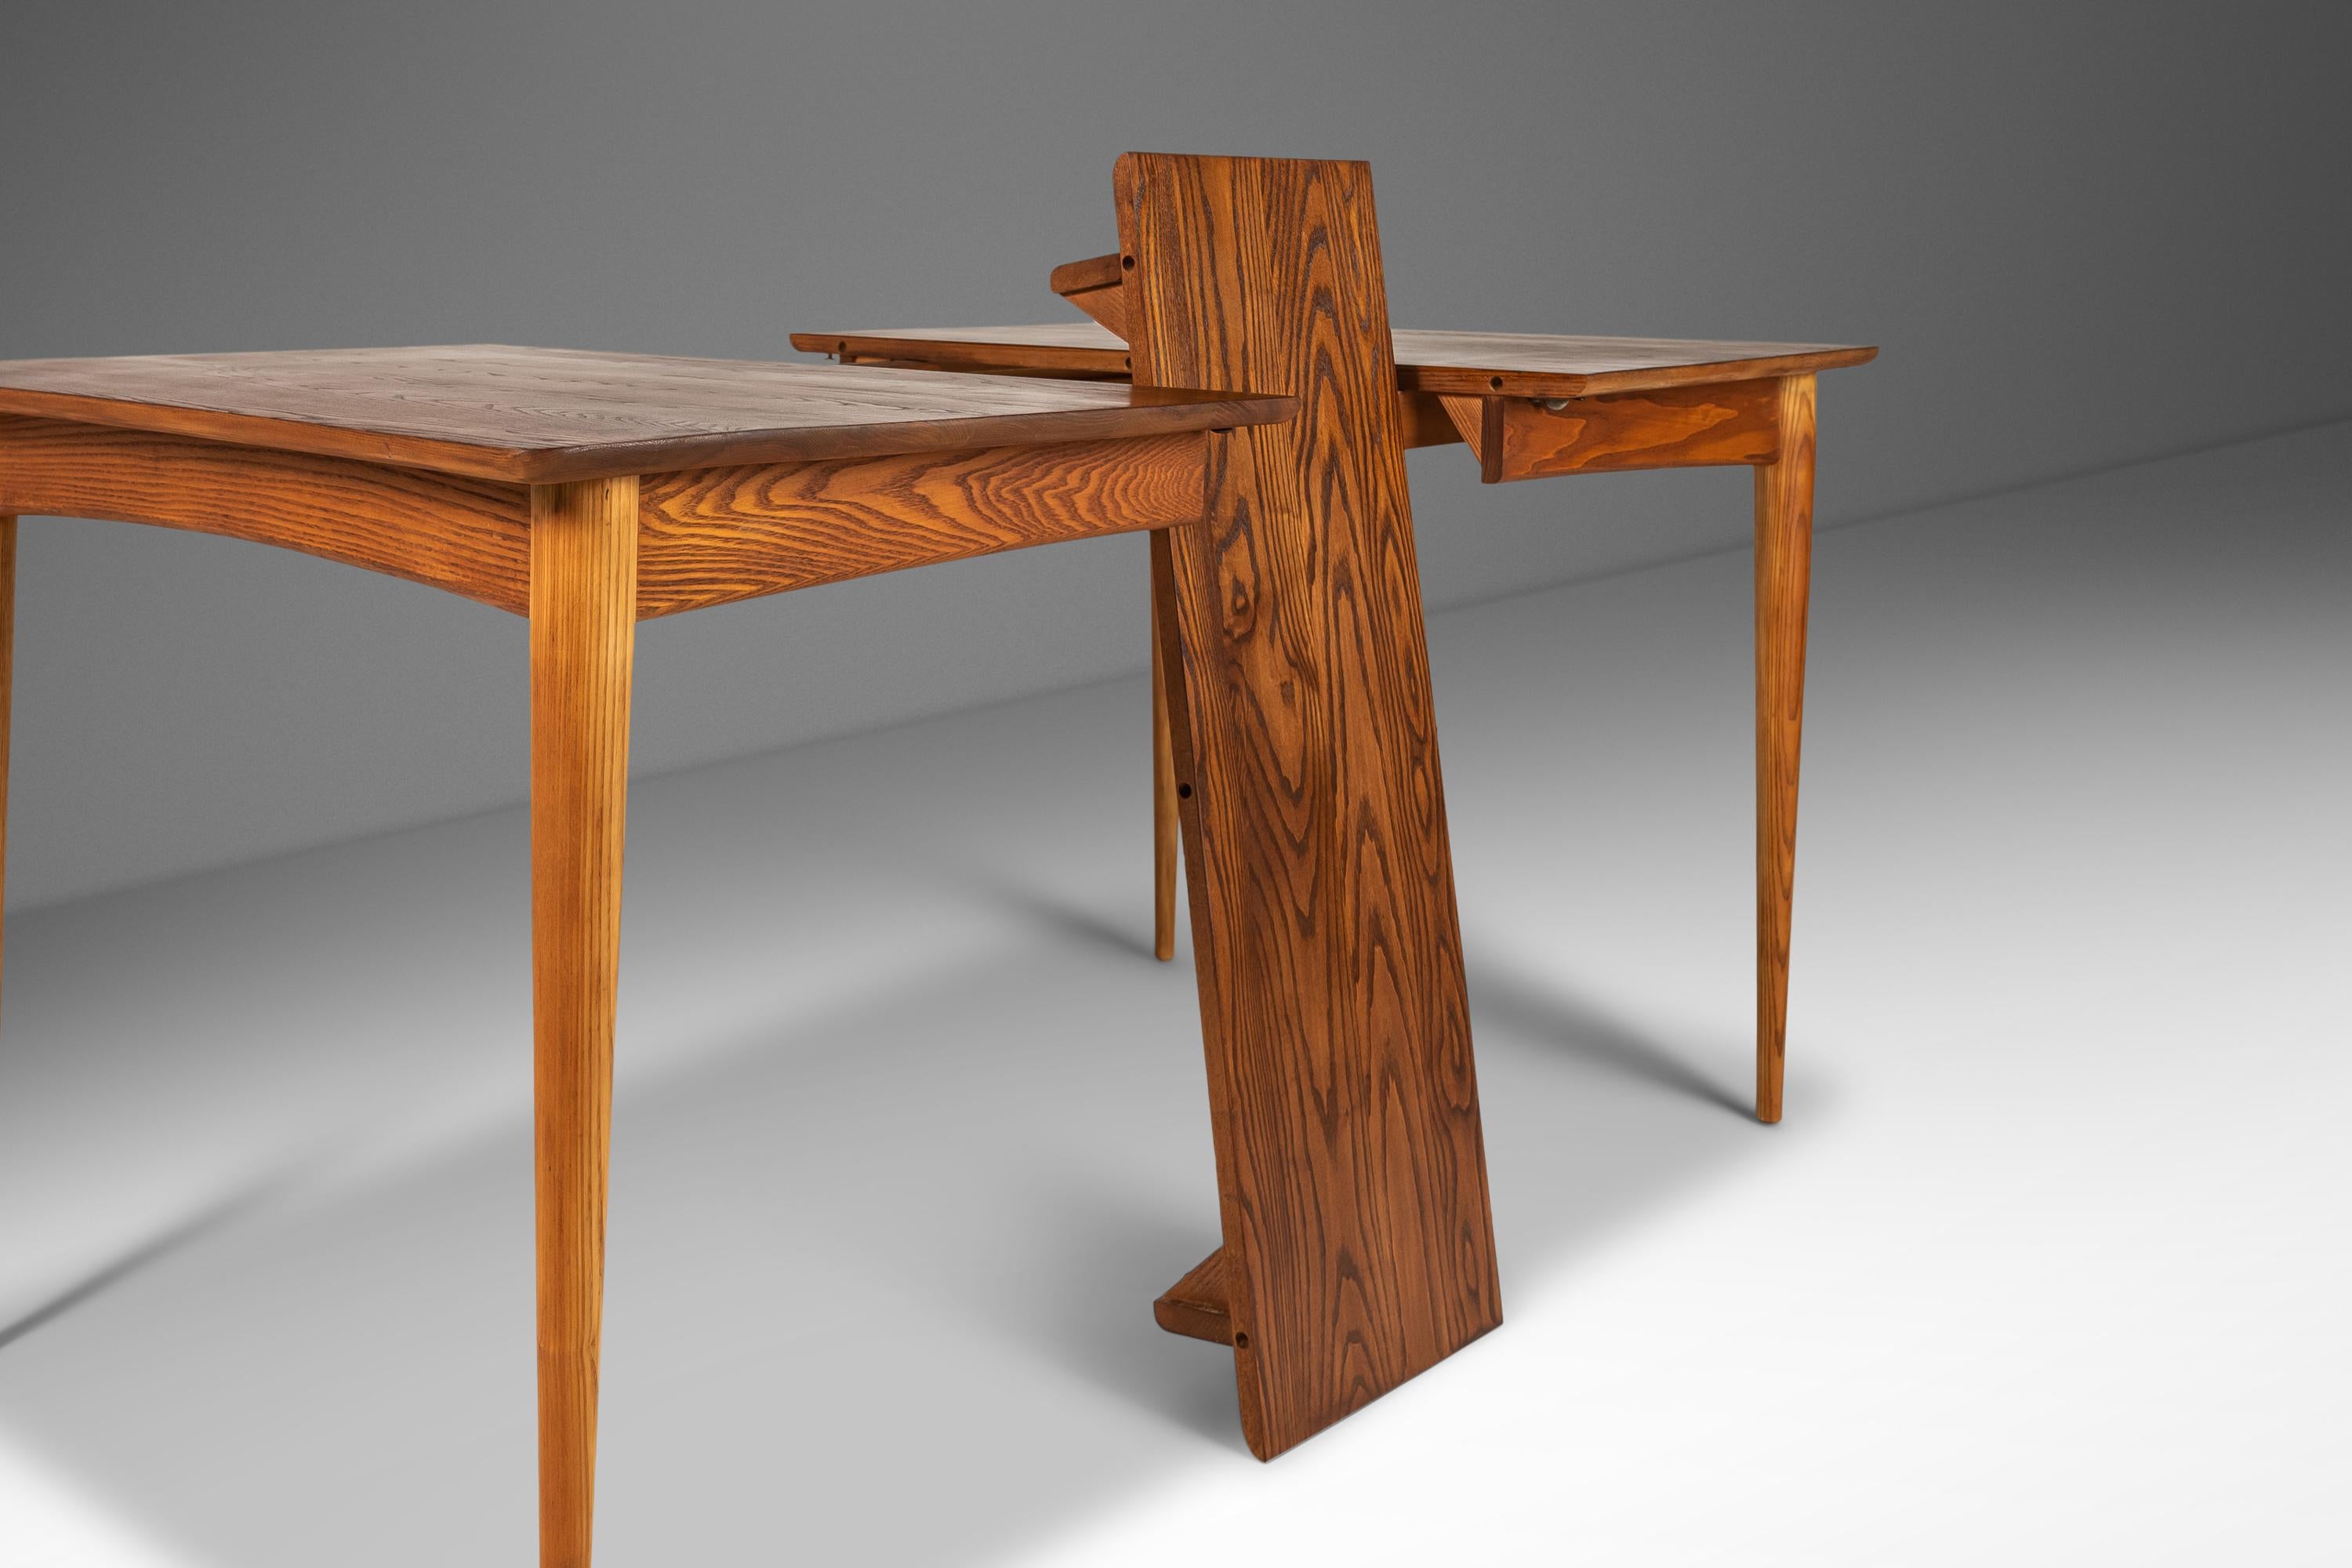 Angular Mid-Century Modern Extension Dining Table in Solid Oak, Usa, circa 1960s For Sale 5